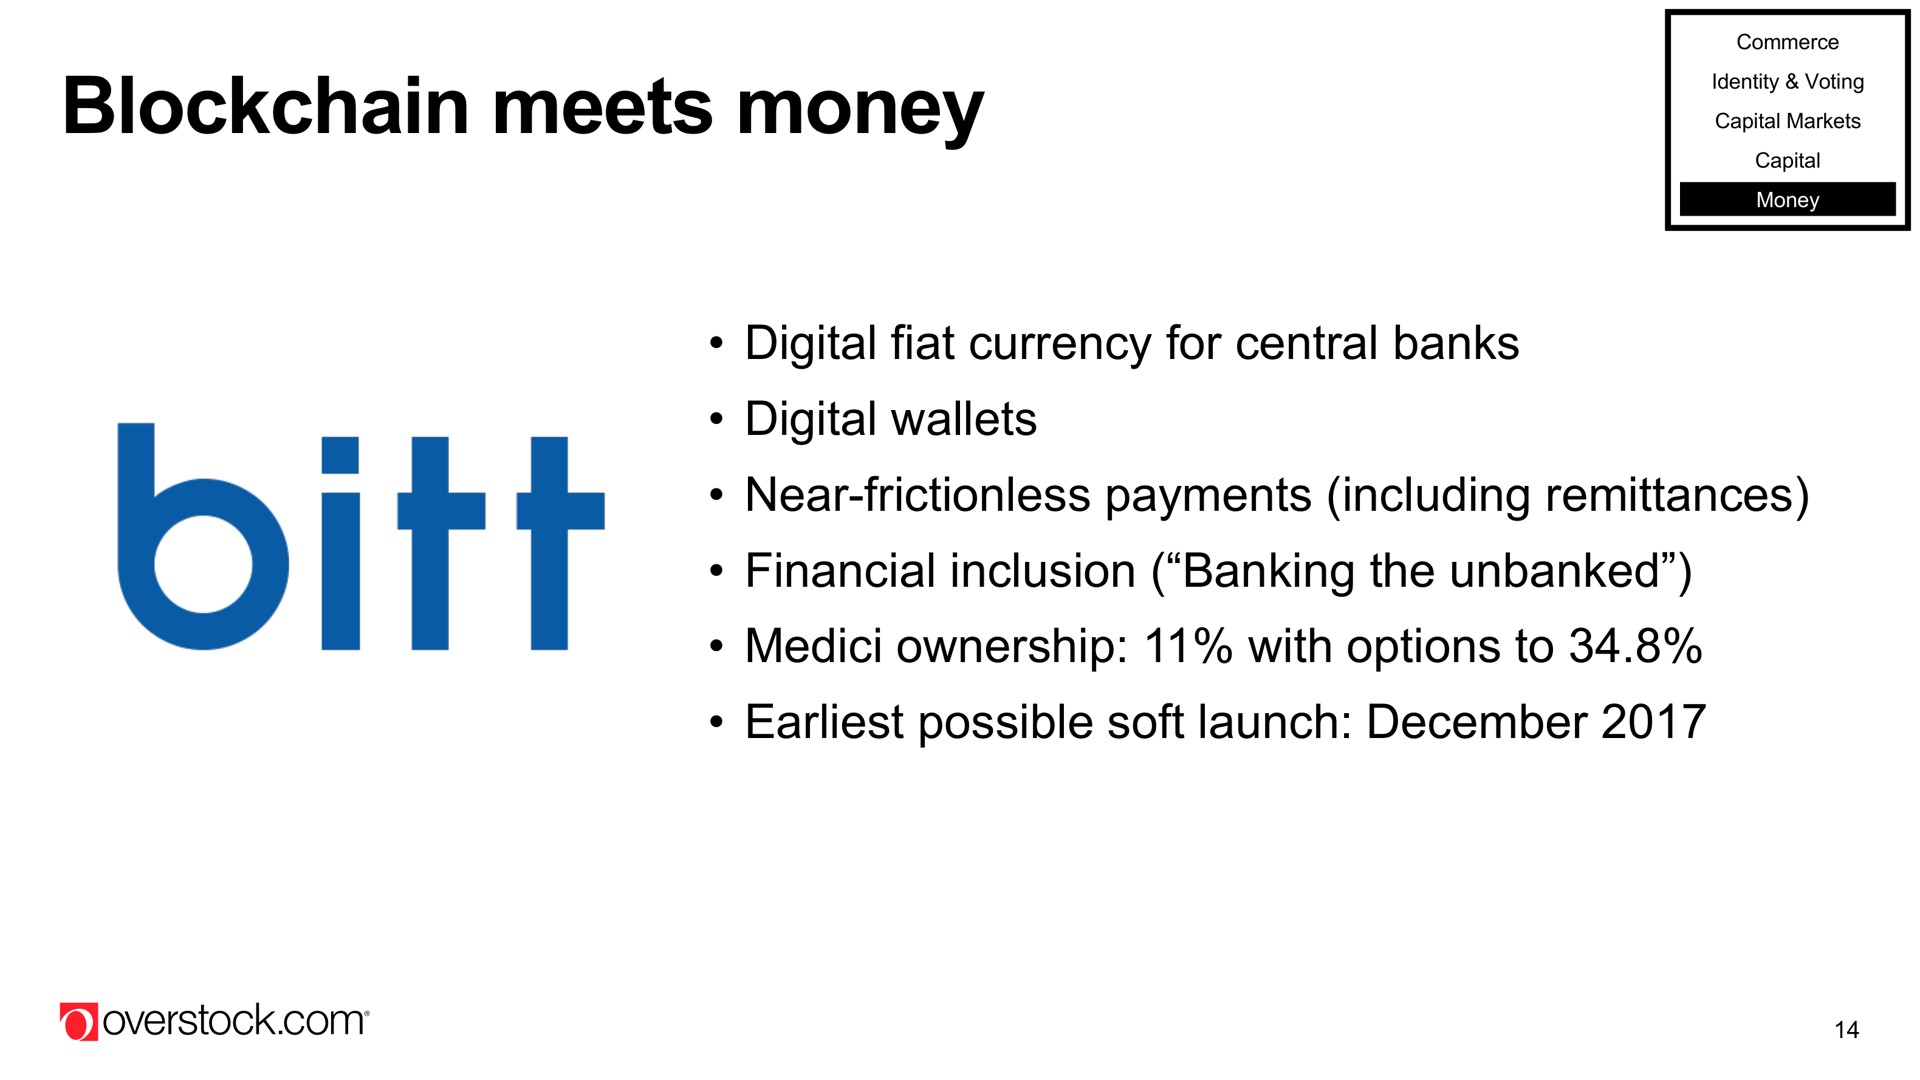 meets money digital fiat currency for central banks digital wallets near frictionless payments including remittances financial inclusion banking the unbanked ownership with options to possible soft launch | Overstock